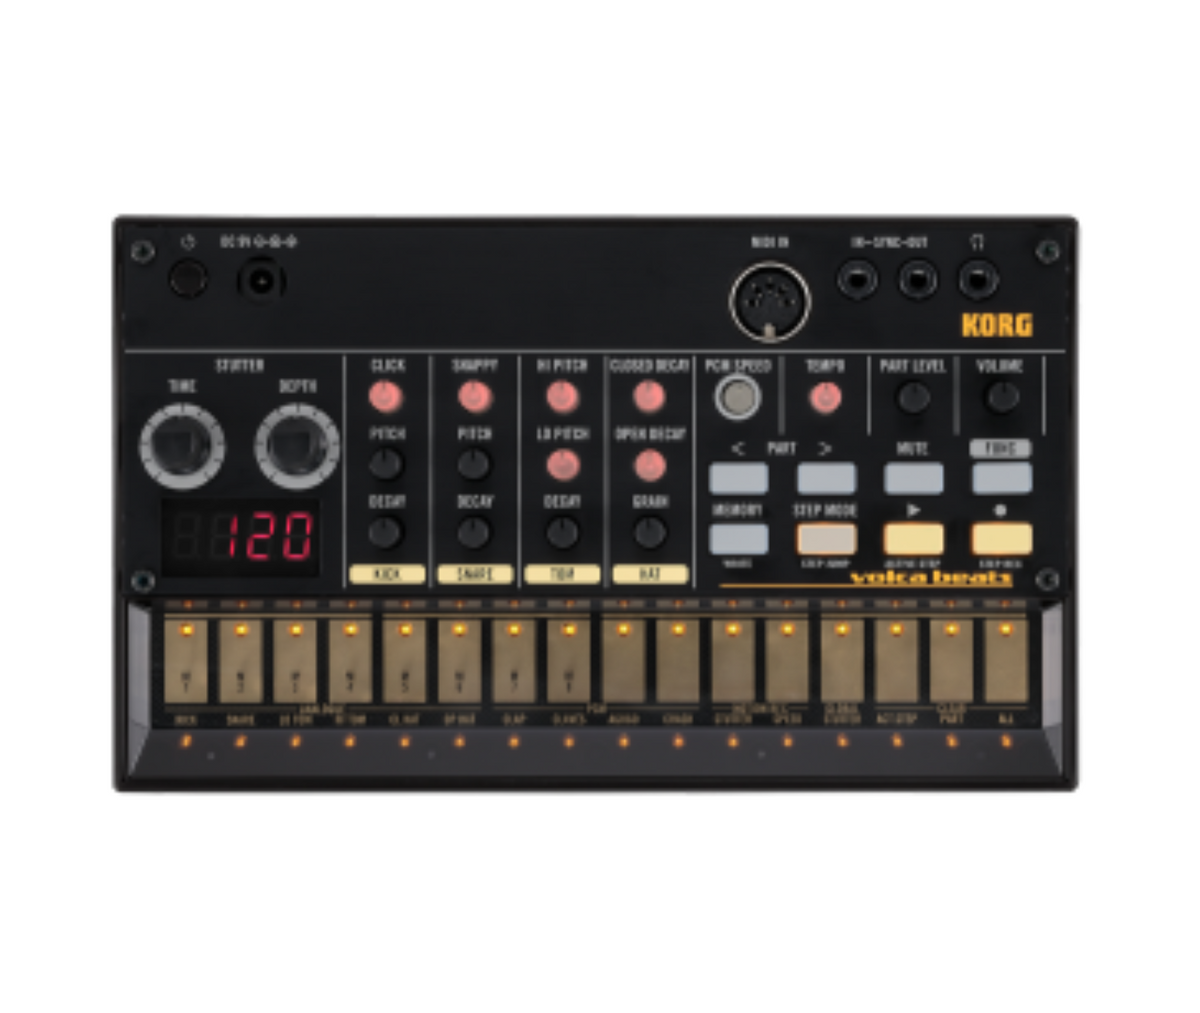 KORG volca beats Best Analogue Rhythm Synthesizer Machine True-Analog Synthesizers with Built-In Sequencers for Analog Leads, Basses, or Rhythms